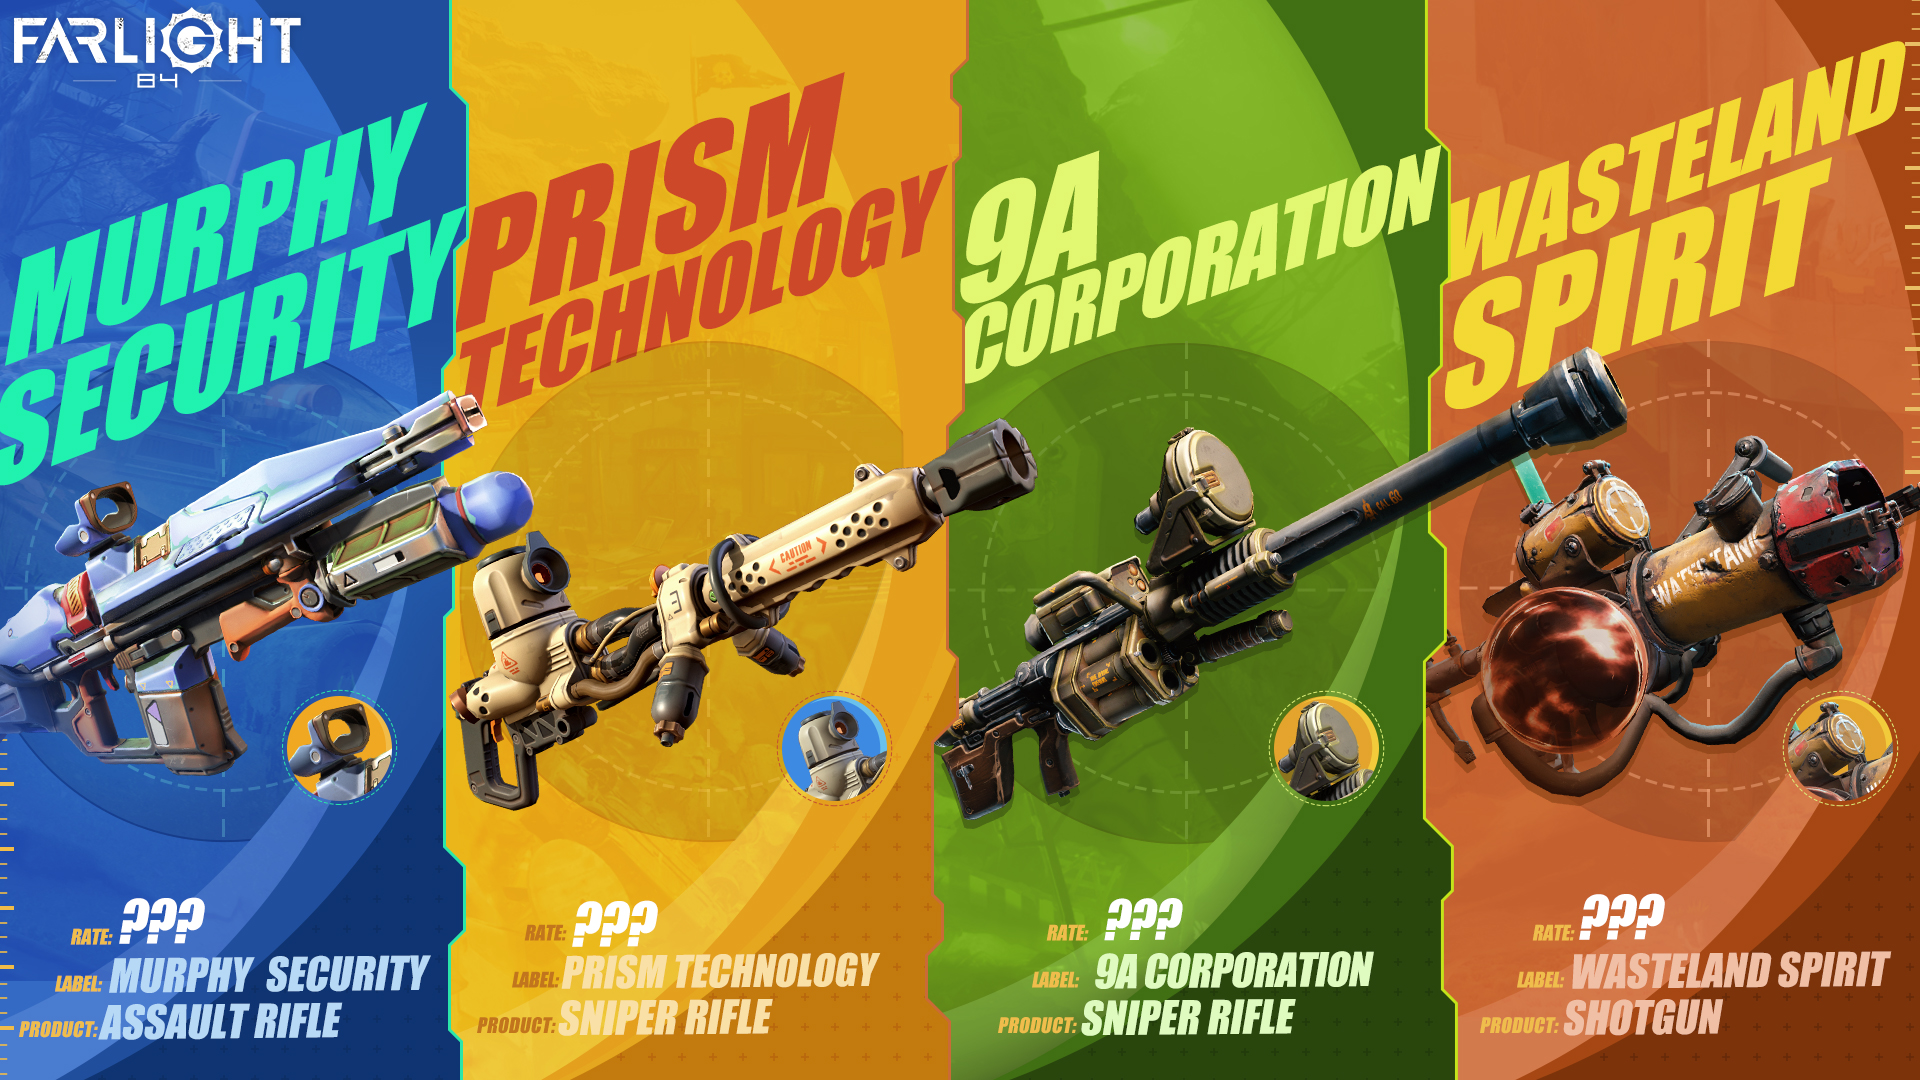 Farlight 84 - ⁉️DECLASSIFIED: The Big Four Weapon Manufacturers, Exposed! Wasteland Spirit: Bang for the Buck Murphy Security: Hire, Buy, or Die Prism Tech: Everything Else is Trash 9A Corp: Quality